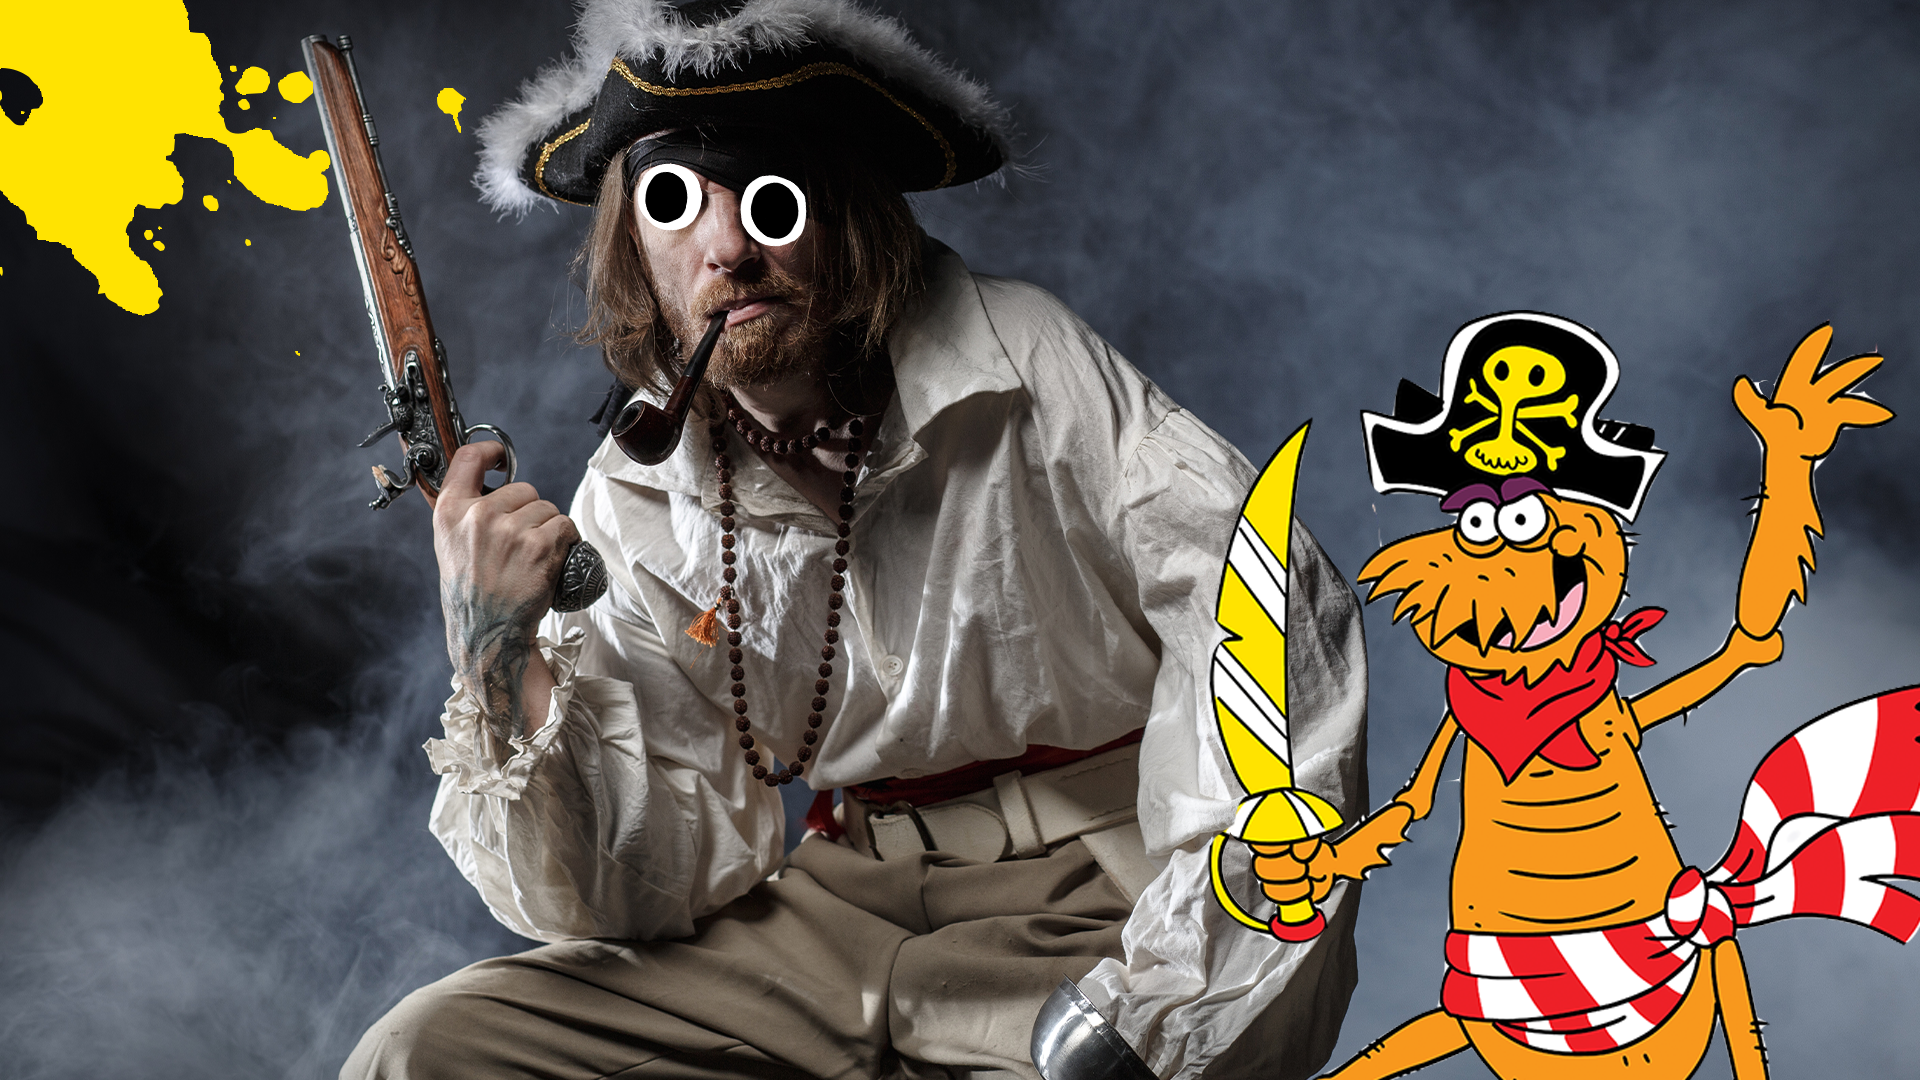 Pirate with flea pirate and yellow splat 